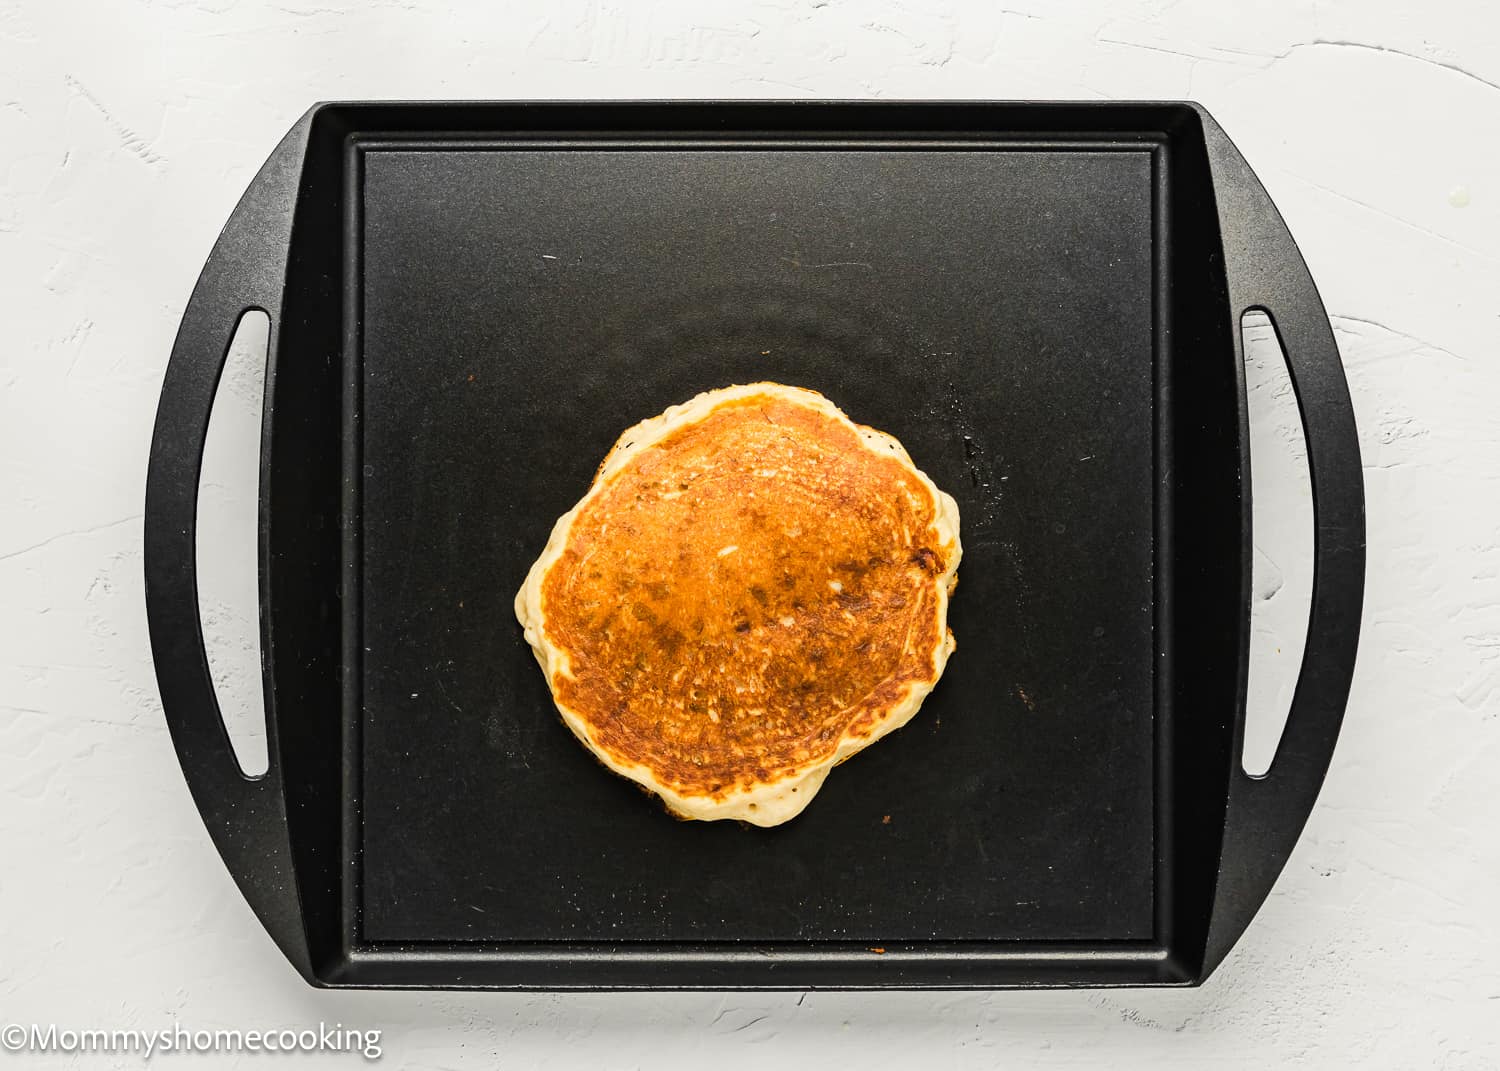 an eggless Banana Pancake being cooked in a griddle.